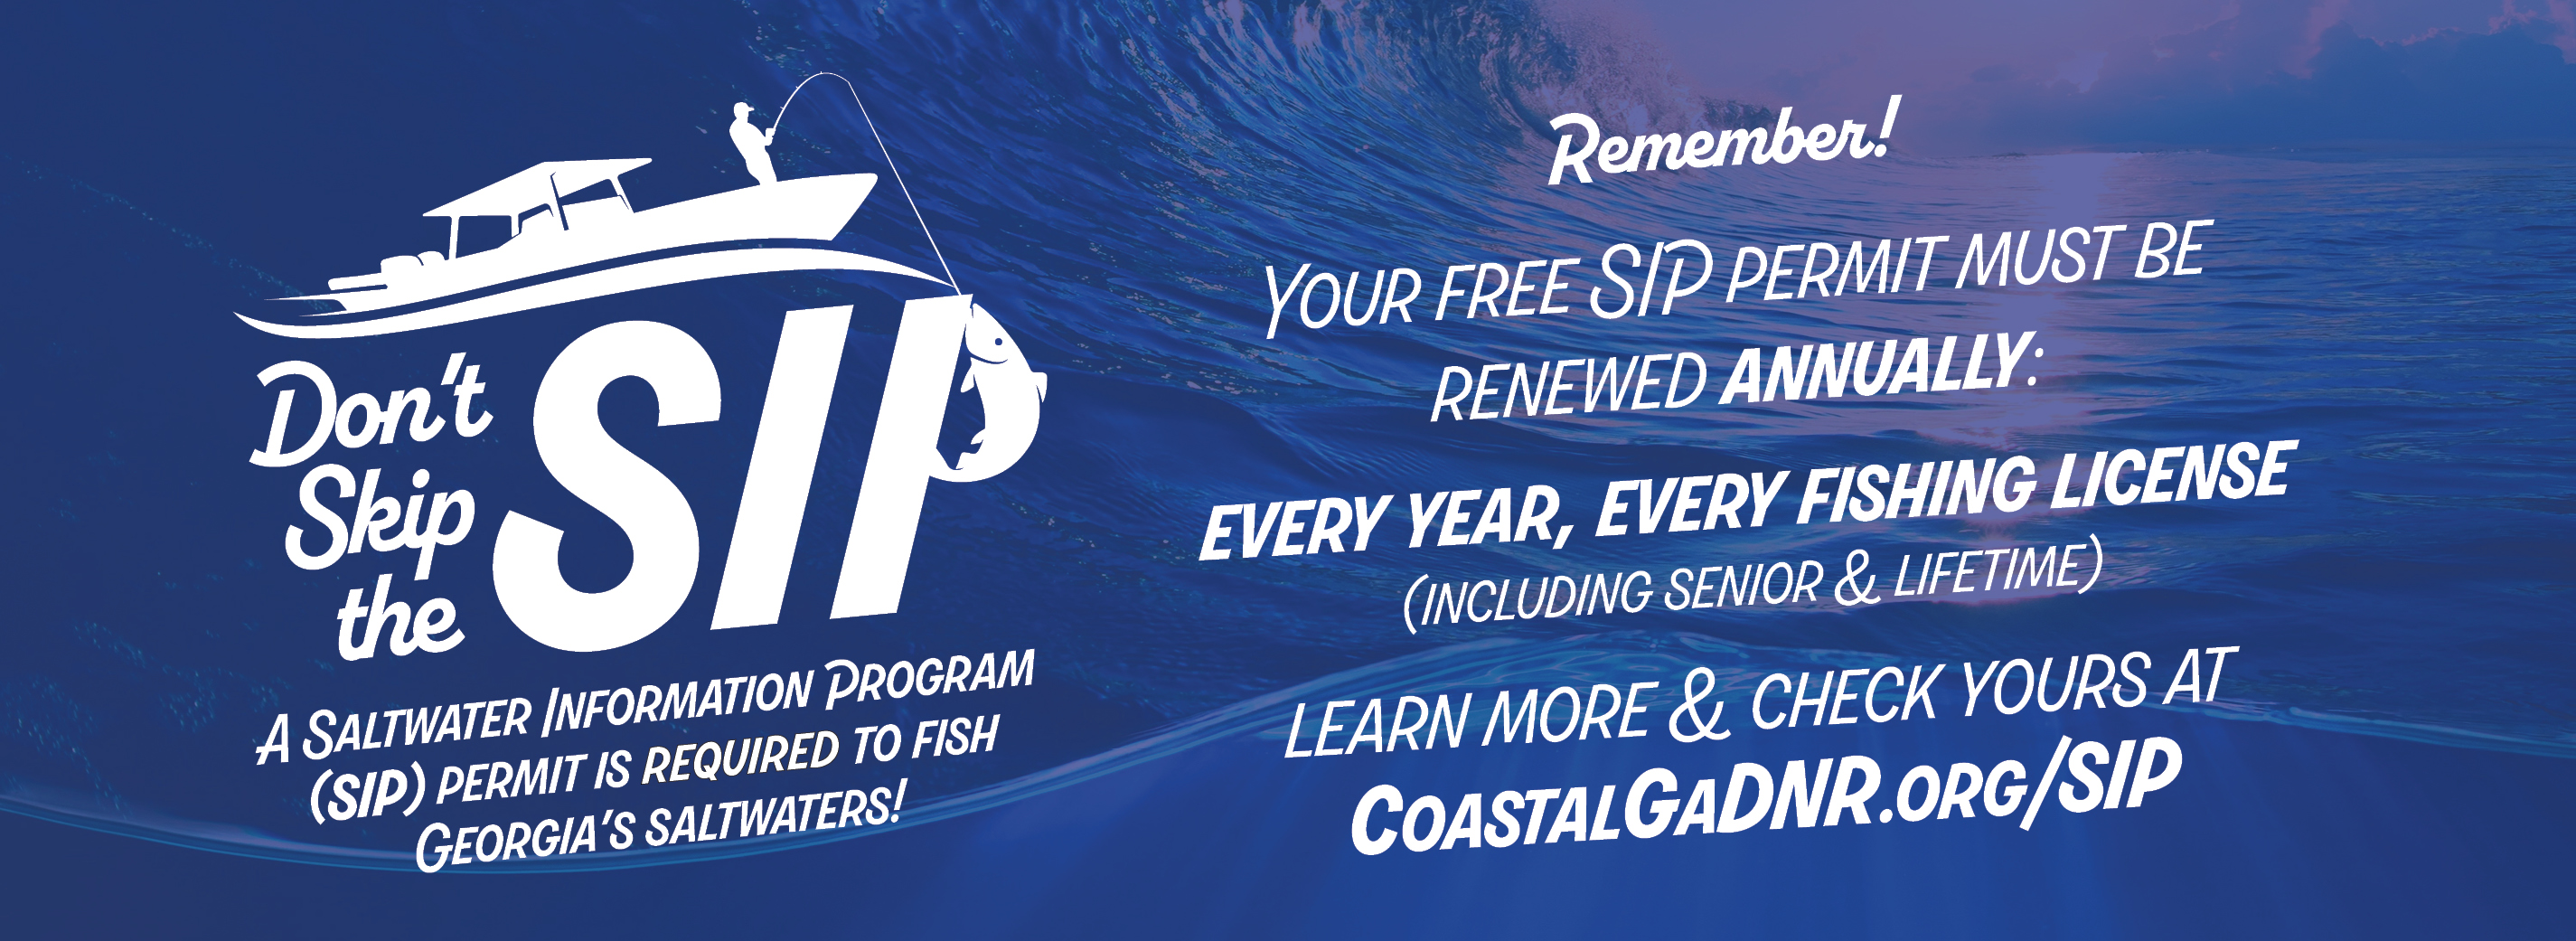 Banner with wave background and text that says: "Don't skip the SIP. A Georgia Saltwater Information Program Permit is required to fish Georgia's Saltwaters. Remember: Your free SIP must be renewed annually. Every year, every license time, including senior and lifetime. Learn more and check yours at CoastalGaDNR.org/SIP."